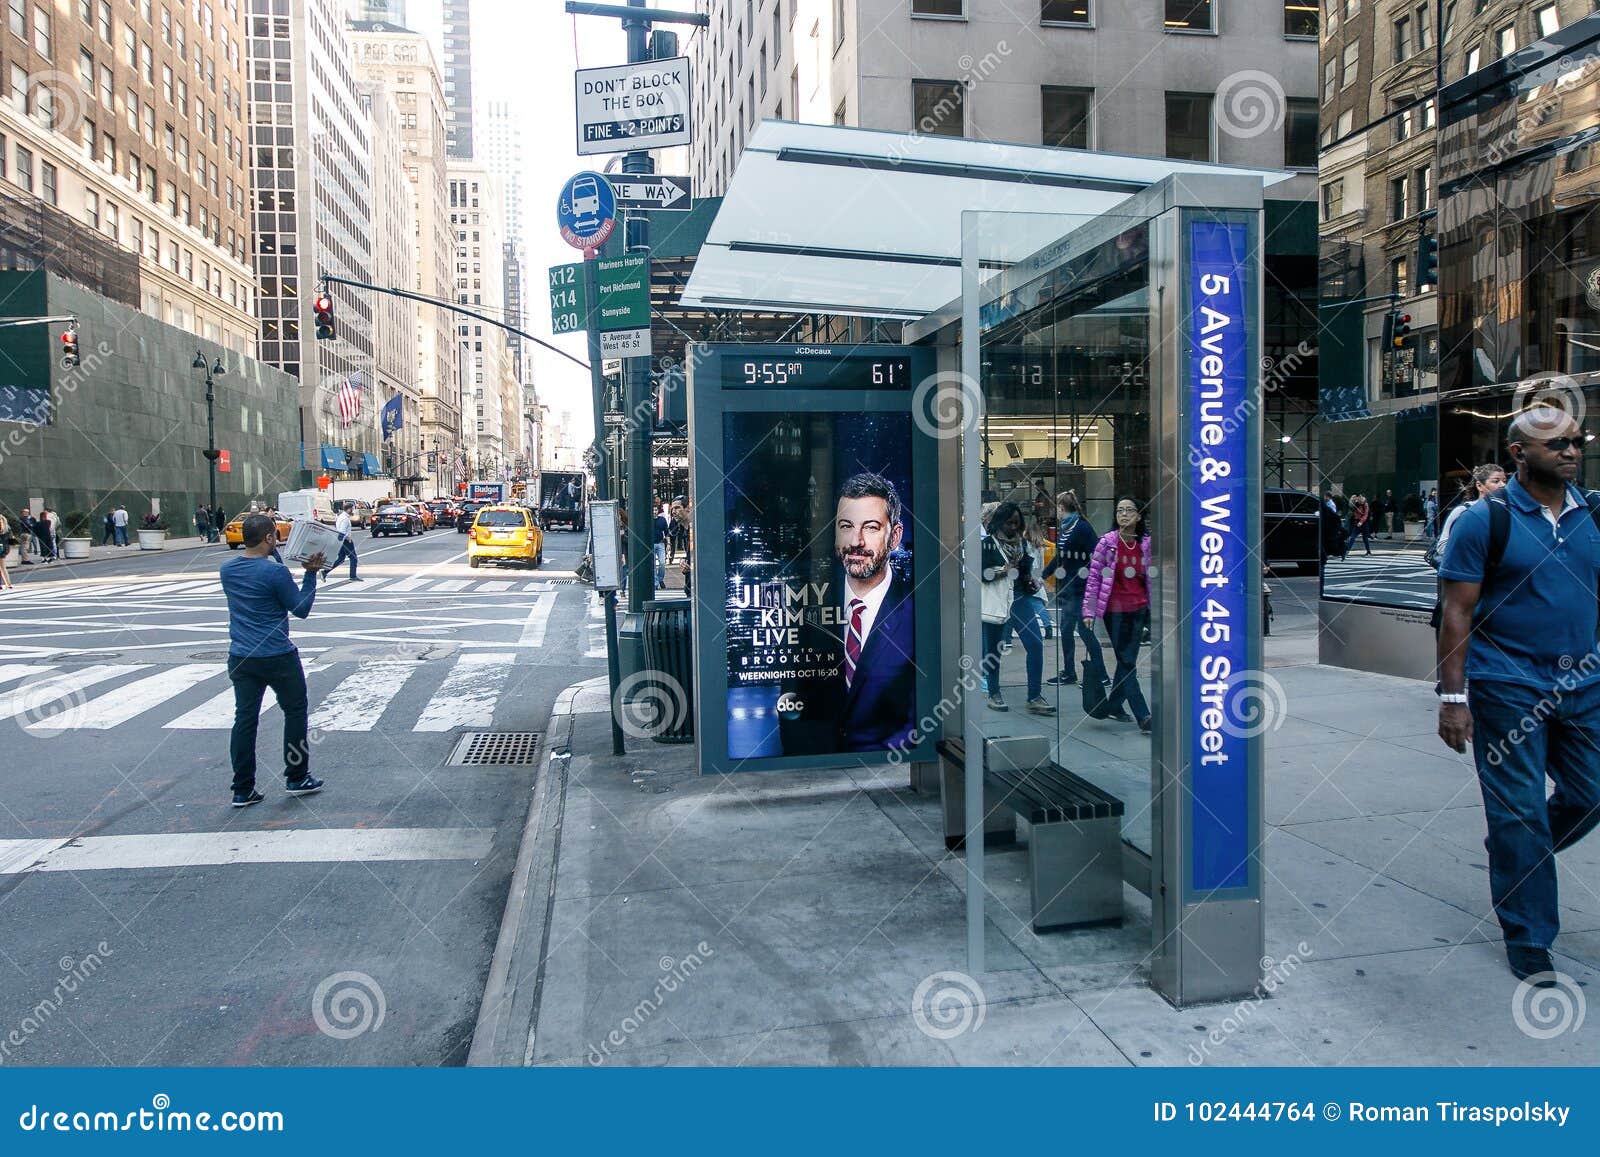 Image result for new york bus stop